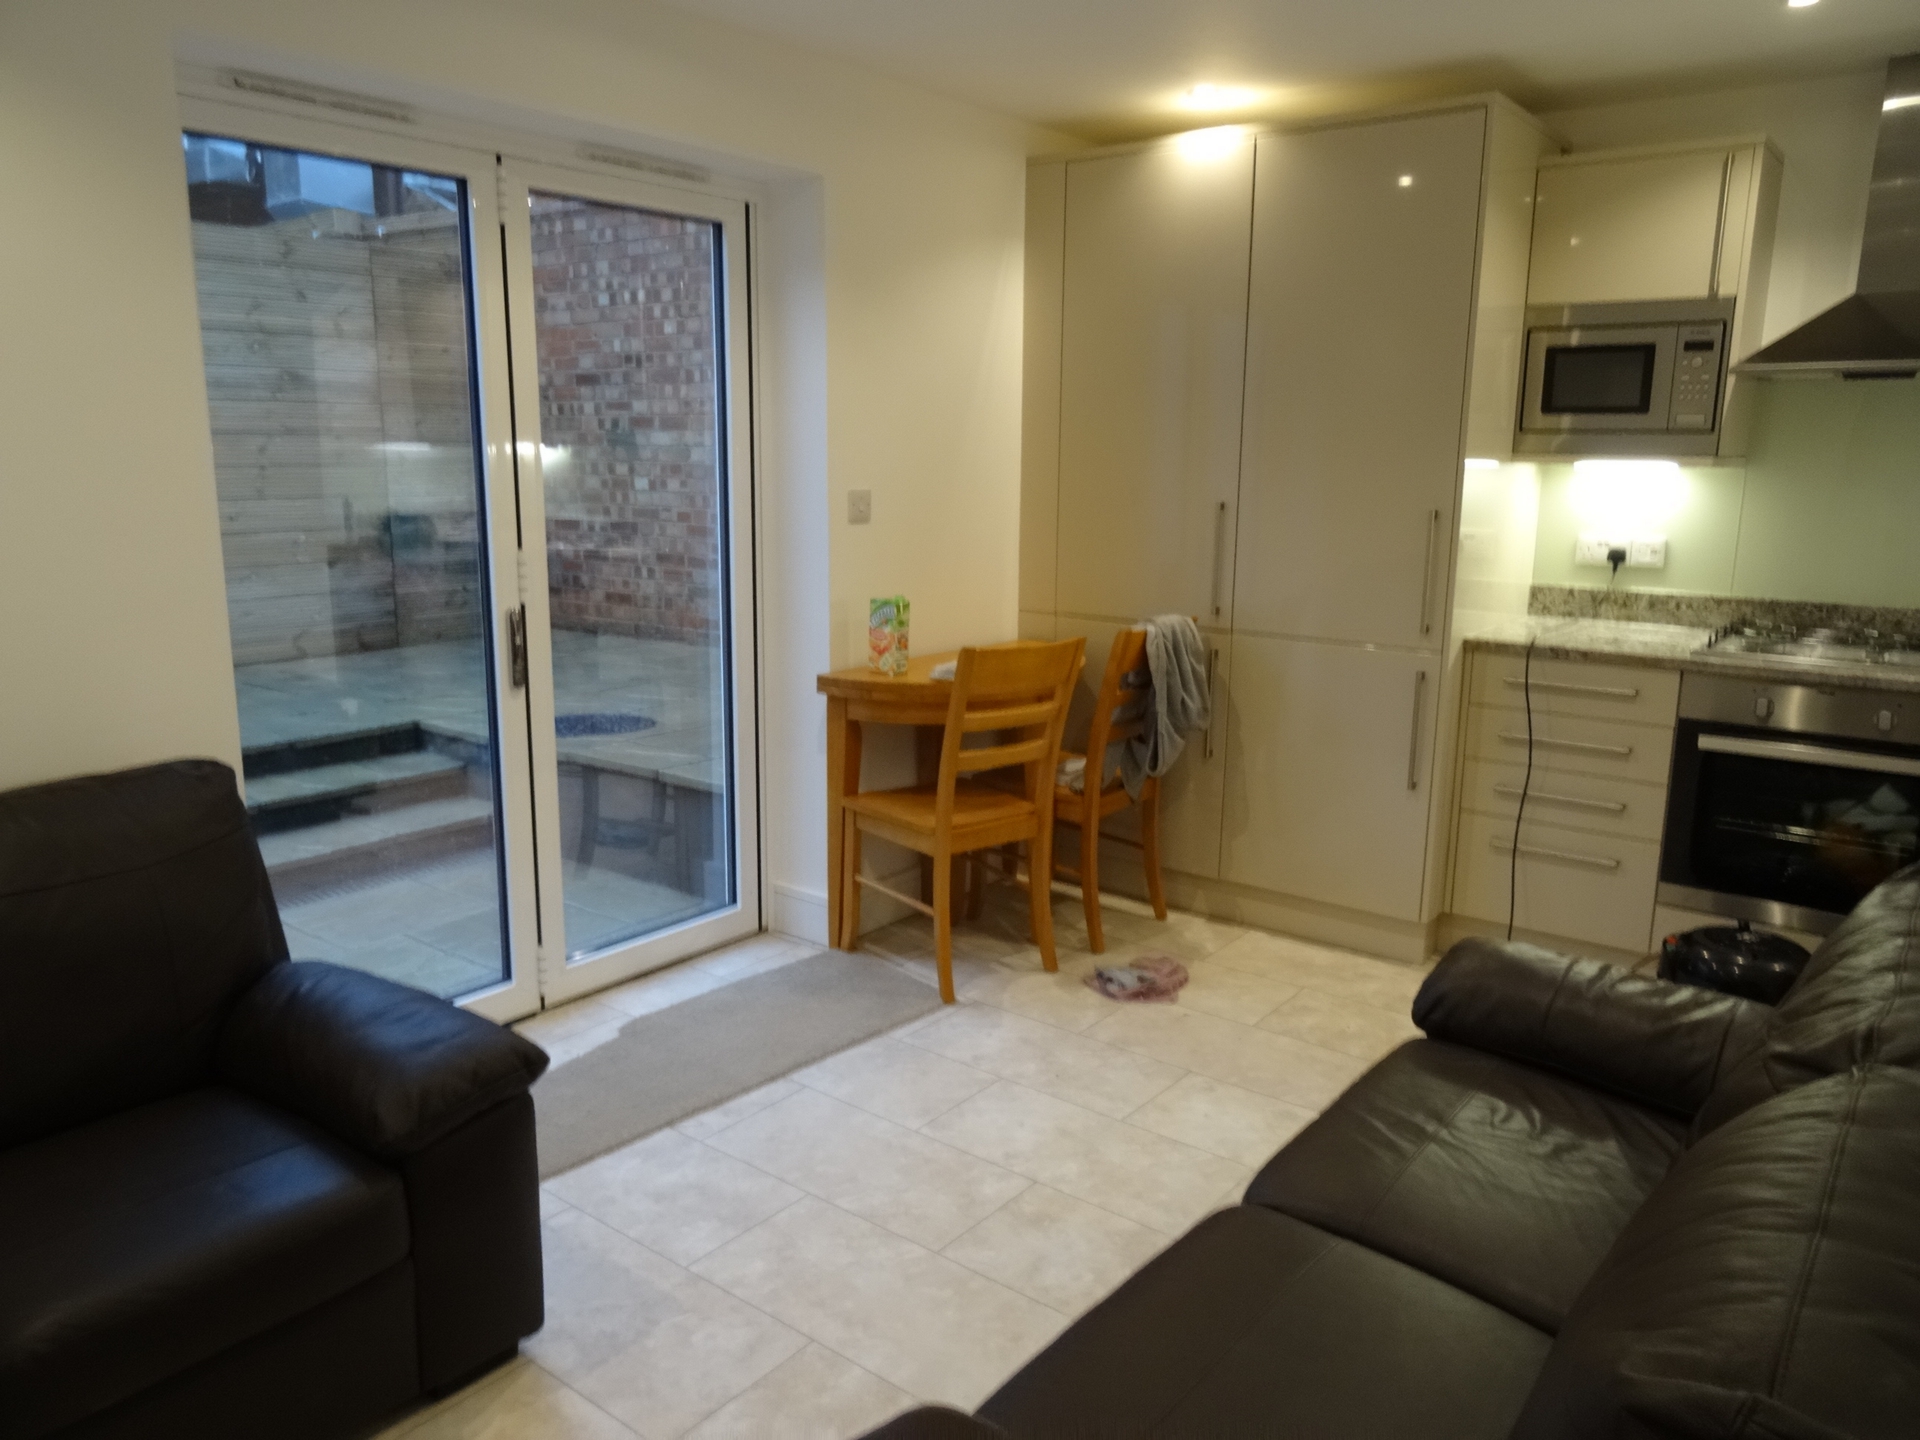 3 Bedroom House to rent in Wimbledon, London, SW19